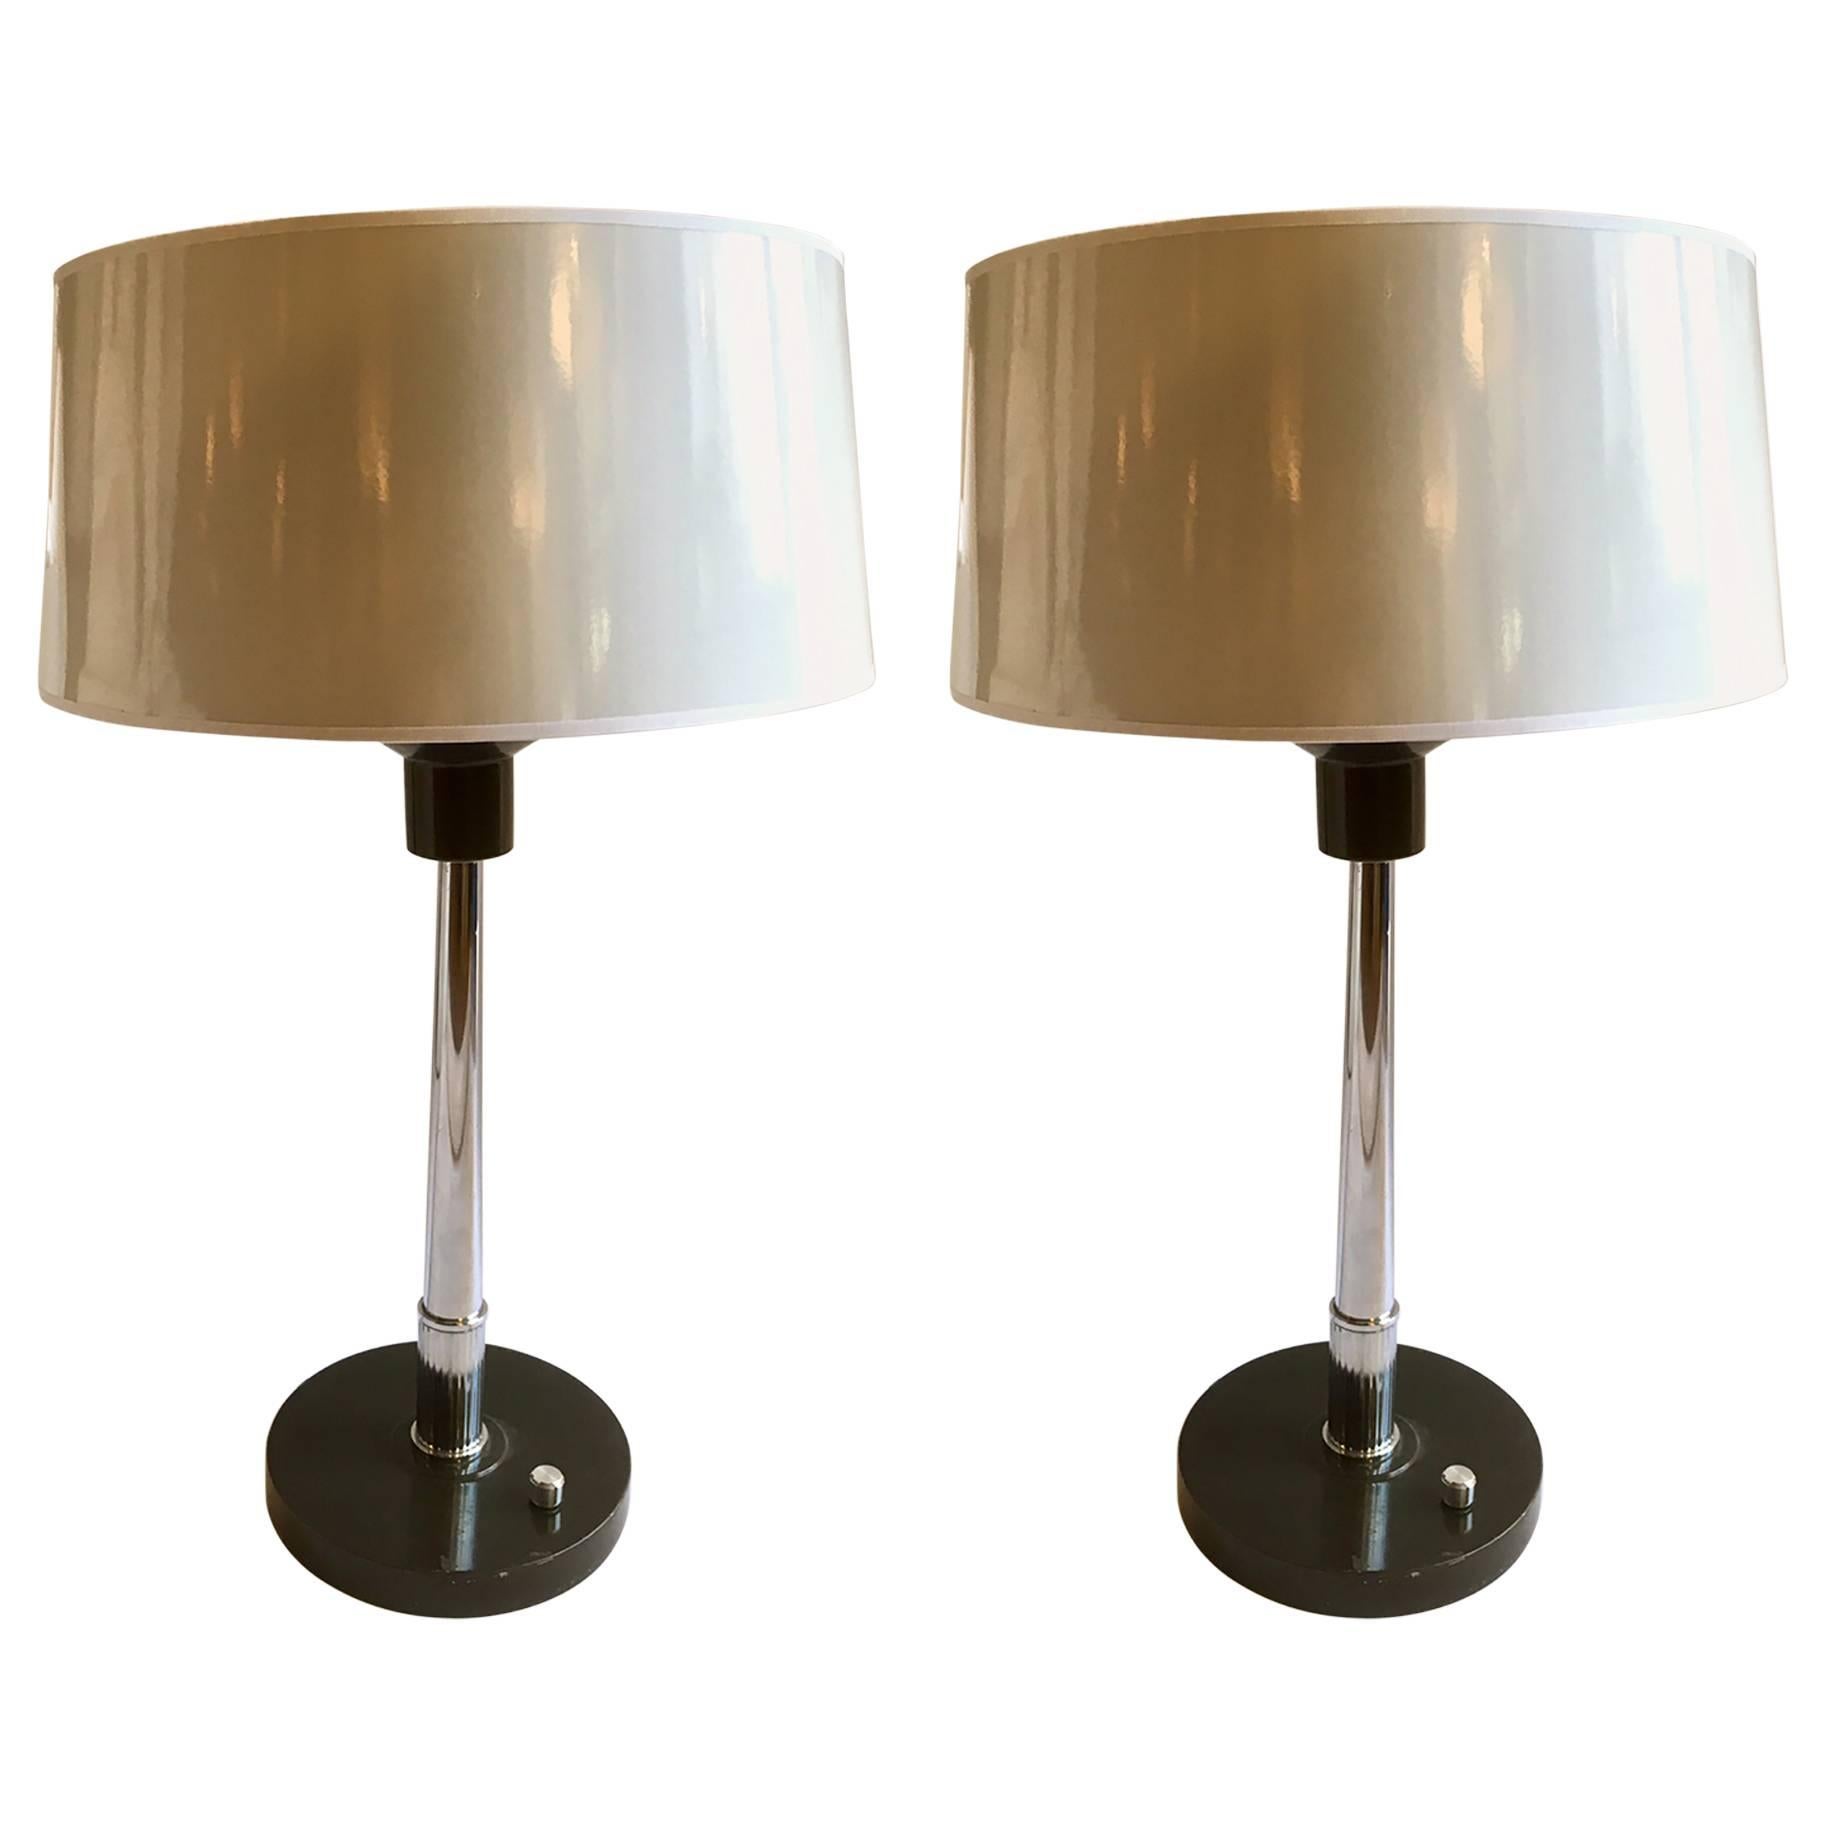 Pair of desk or table lamps, manufactured in lacquered metal in his base and column in chromed metal. Shades in white.patent leather, silver inside.